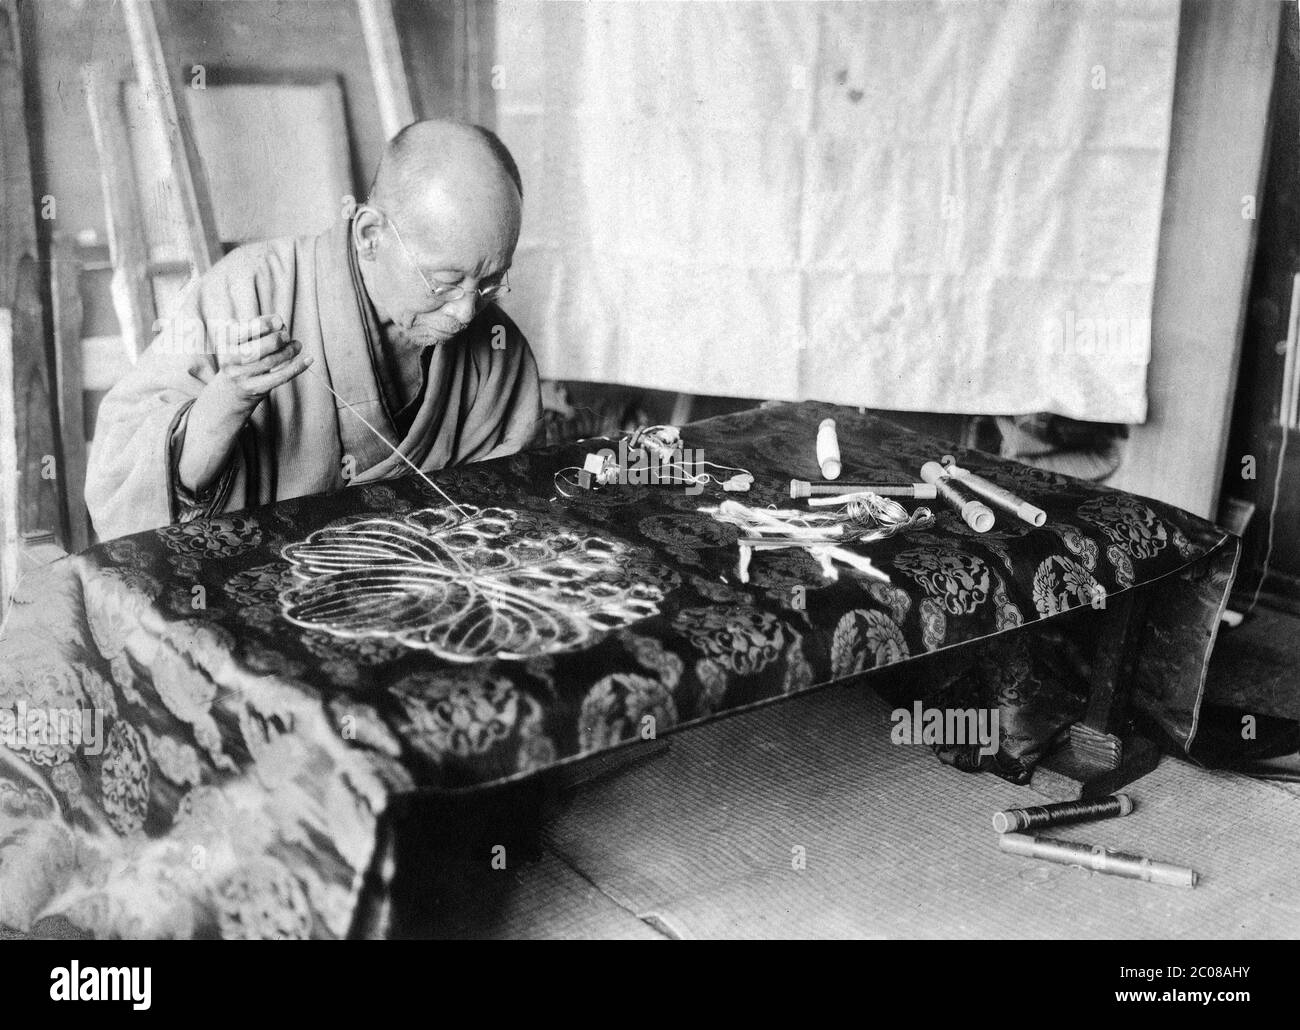 [ 1910s Japan - Artisan Embroidering Obi ] — A craftsman in traditional clothing is embroidering a silk obi, a long, broad sash tied around the waist of a kimono.  20th century vintage gelatin silver print. Stock Photo